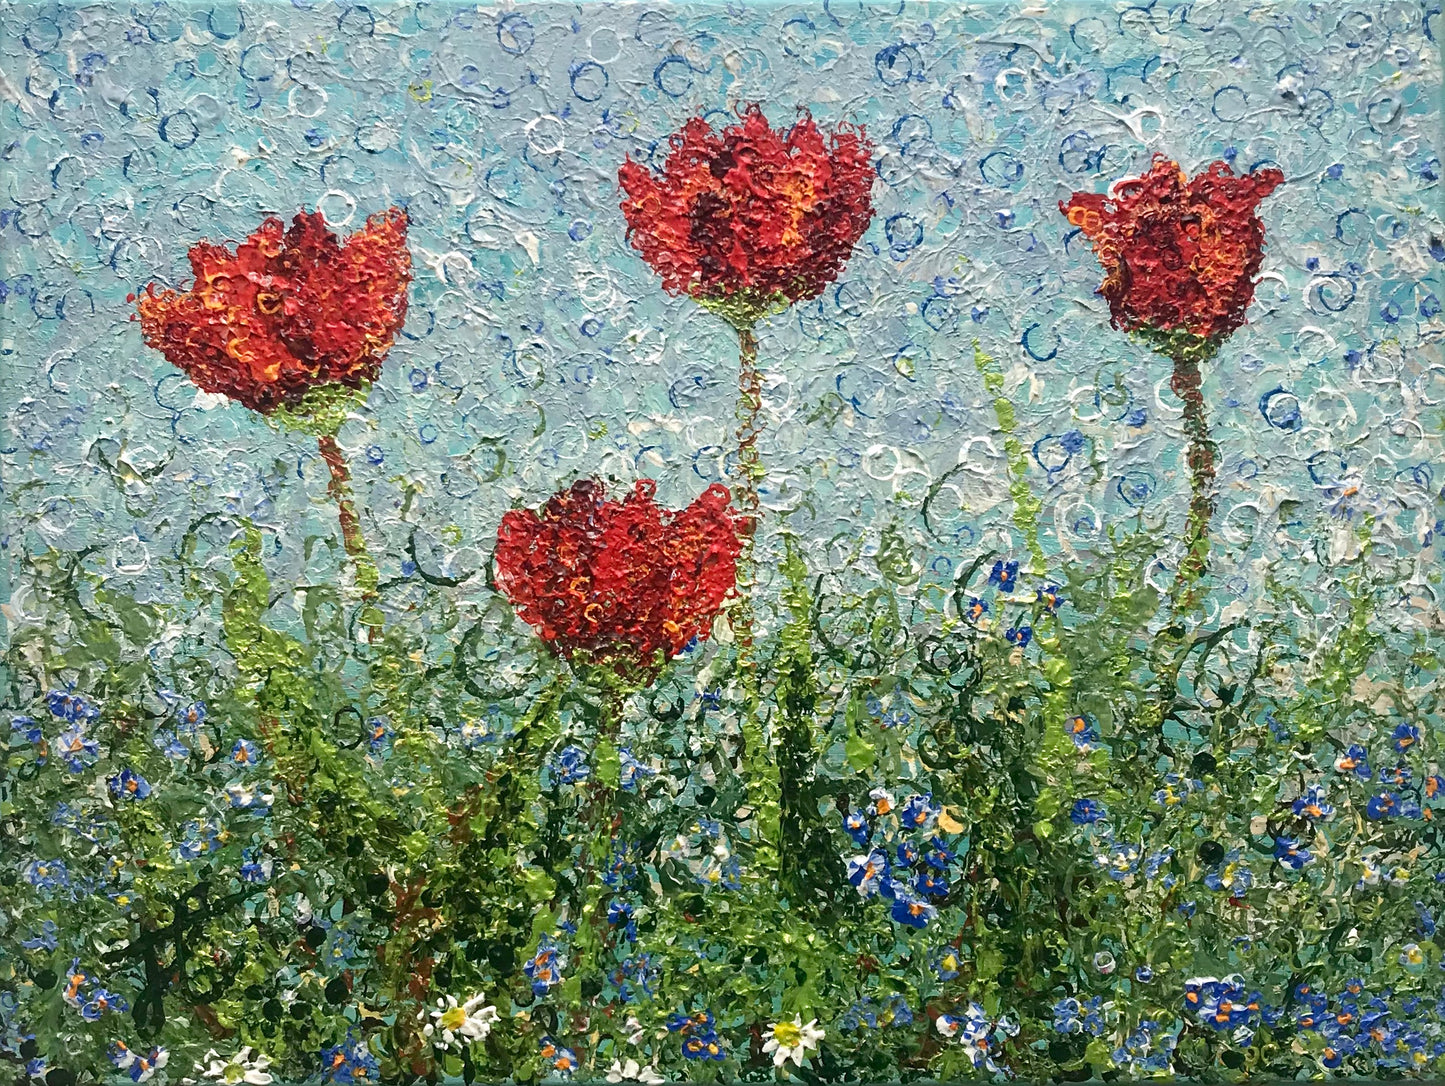 Painting cropped to edge: 4 red tulips bloom against a blue sky. Below them there is lots of green foliage with blue forget-me-nots and white daisies. The image comprises layers of different sized circles.